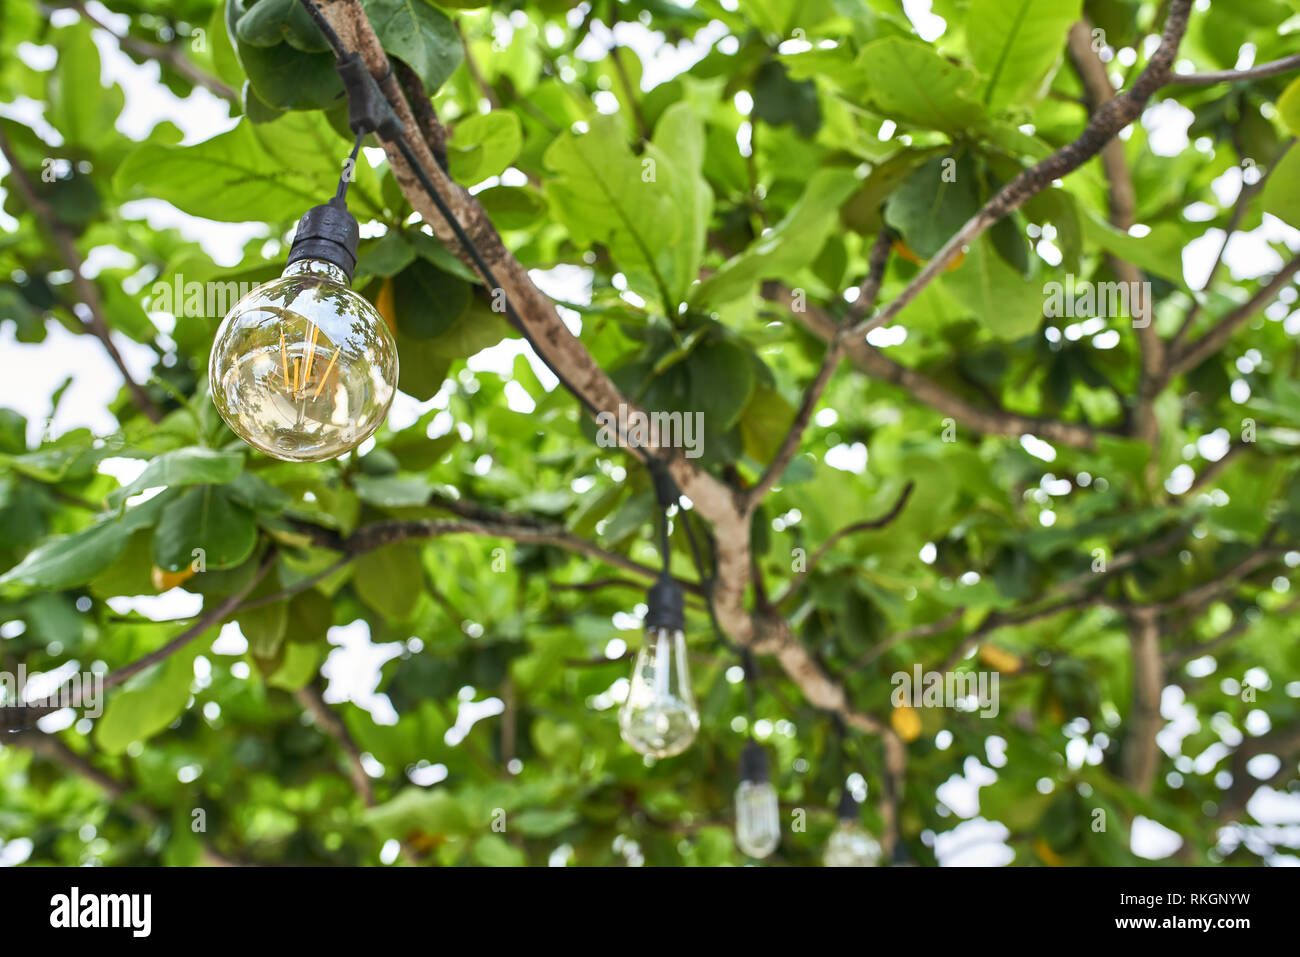 Few filament bulbs are hanging on the black cables on the tropical green tree on the blurred background outdoors. They are of different forms. Closeup Stock Photo